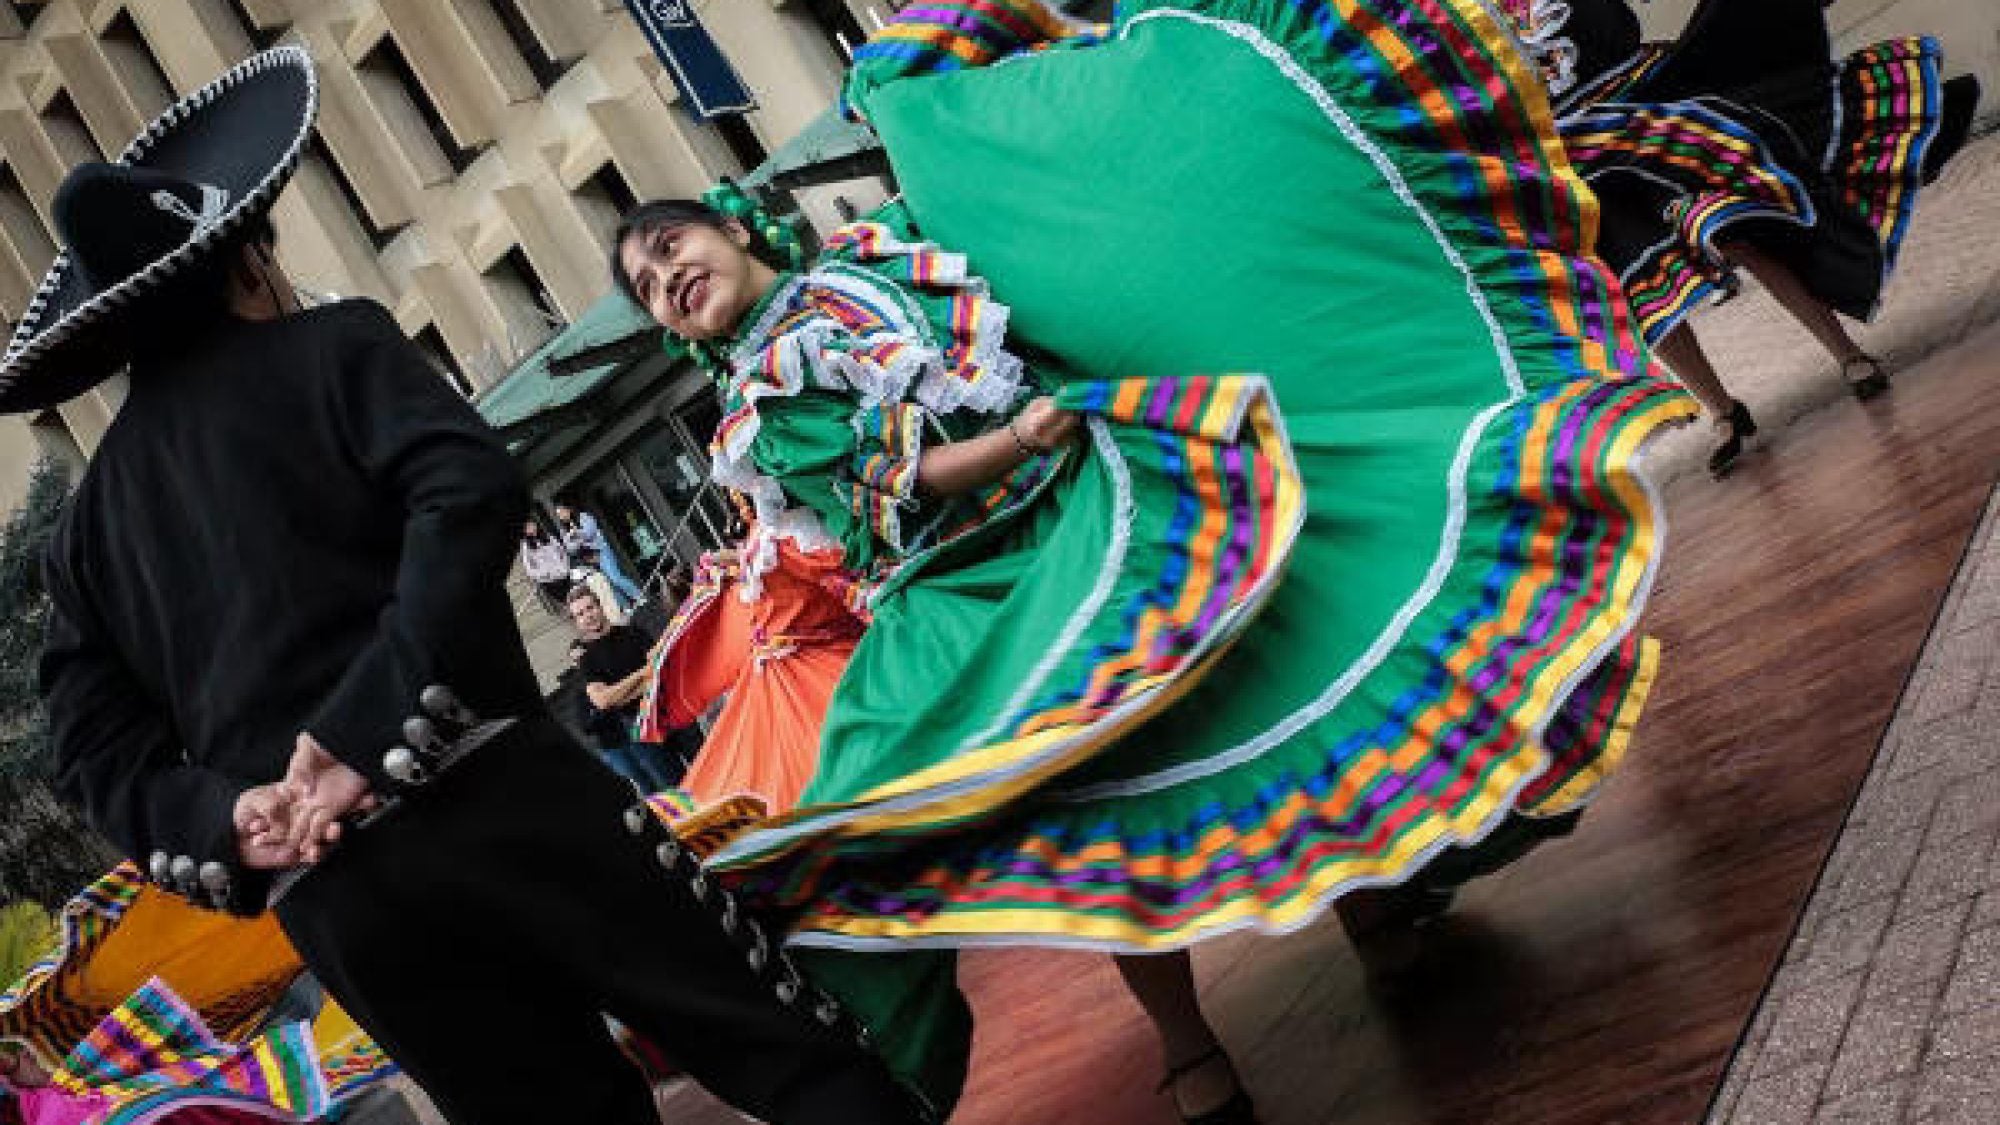 Ballet Folklorico Mexicano de Georgetown dancers twirl in colorful green and orange costumes.